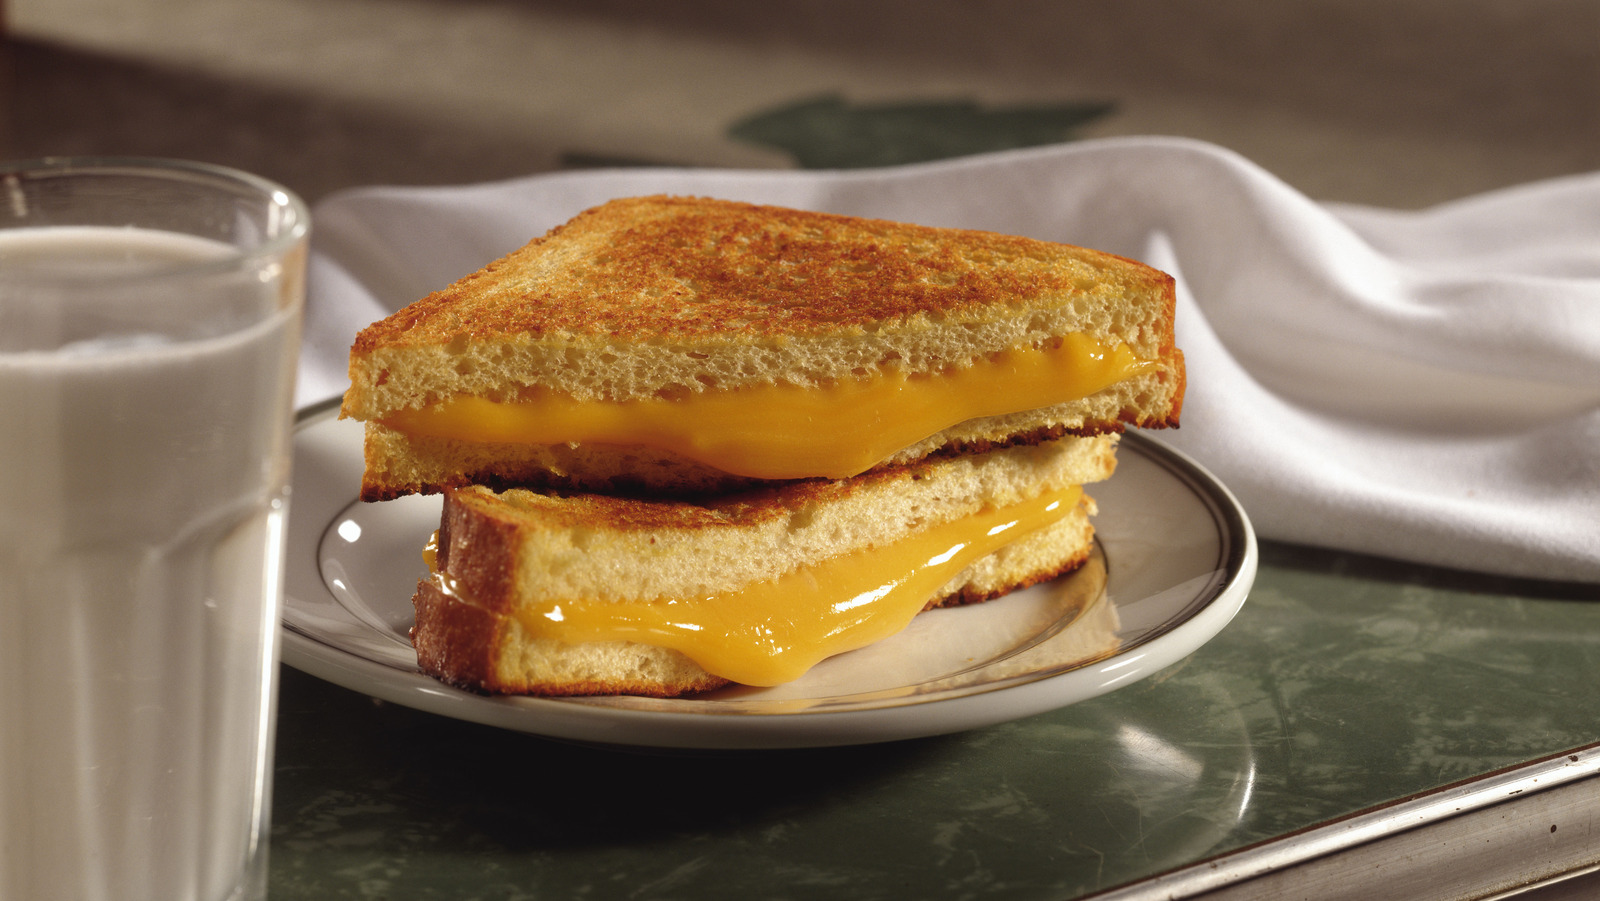 https://www.thedailymeal.com/img/gallery/dont-make-grilled-cheese-in-a-toaster-unless-you-want-to-start-a-fire/l-intro-1679627477.jpg